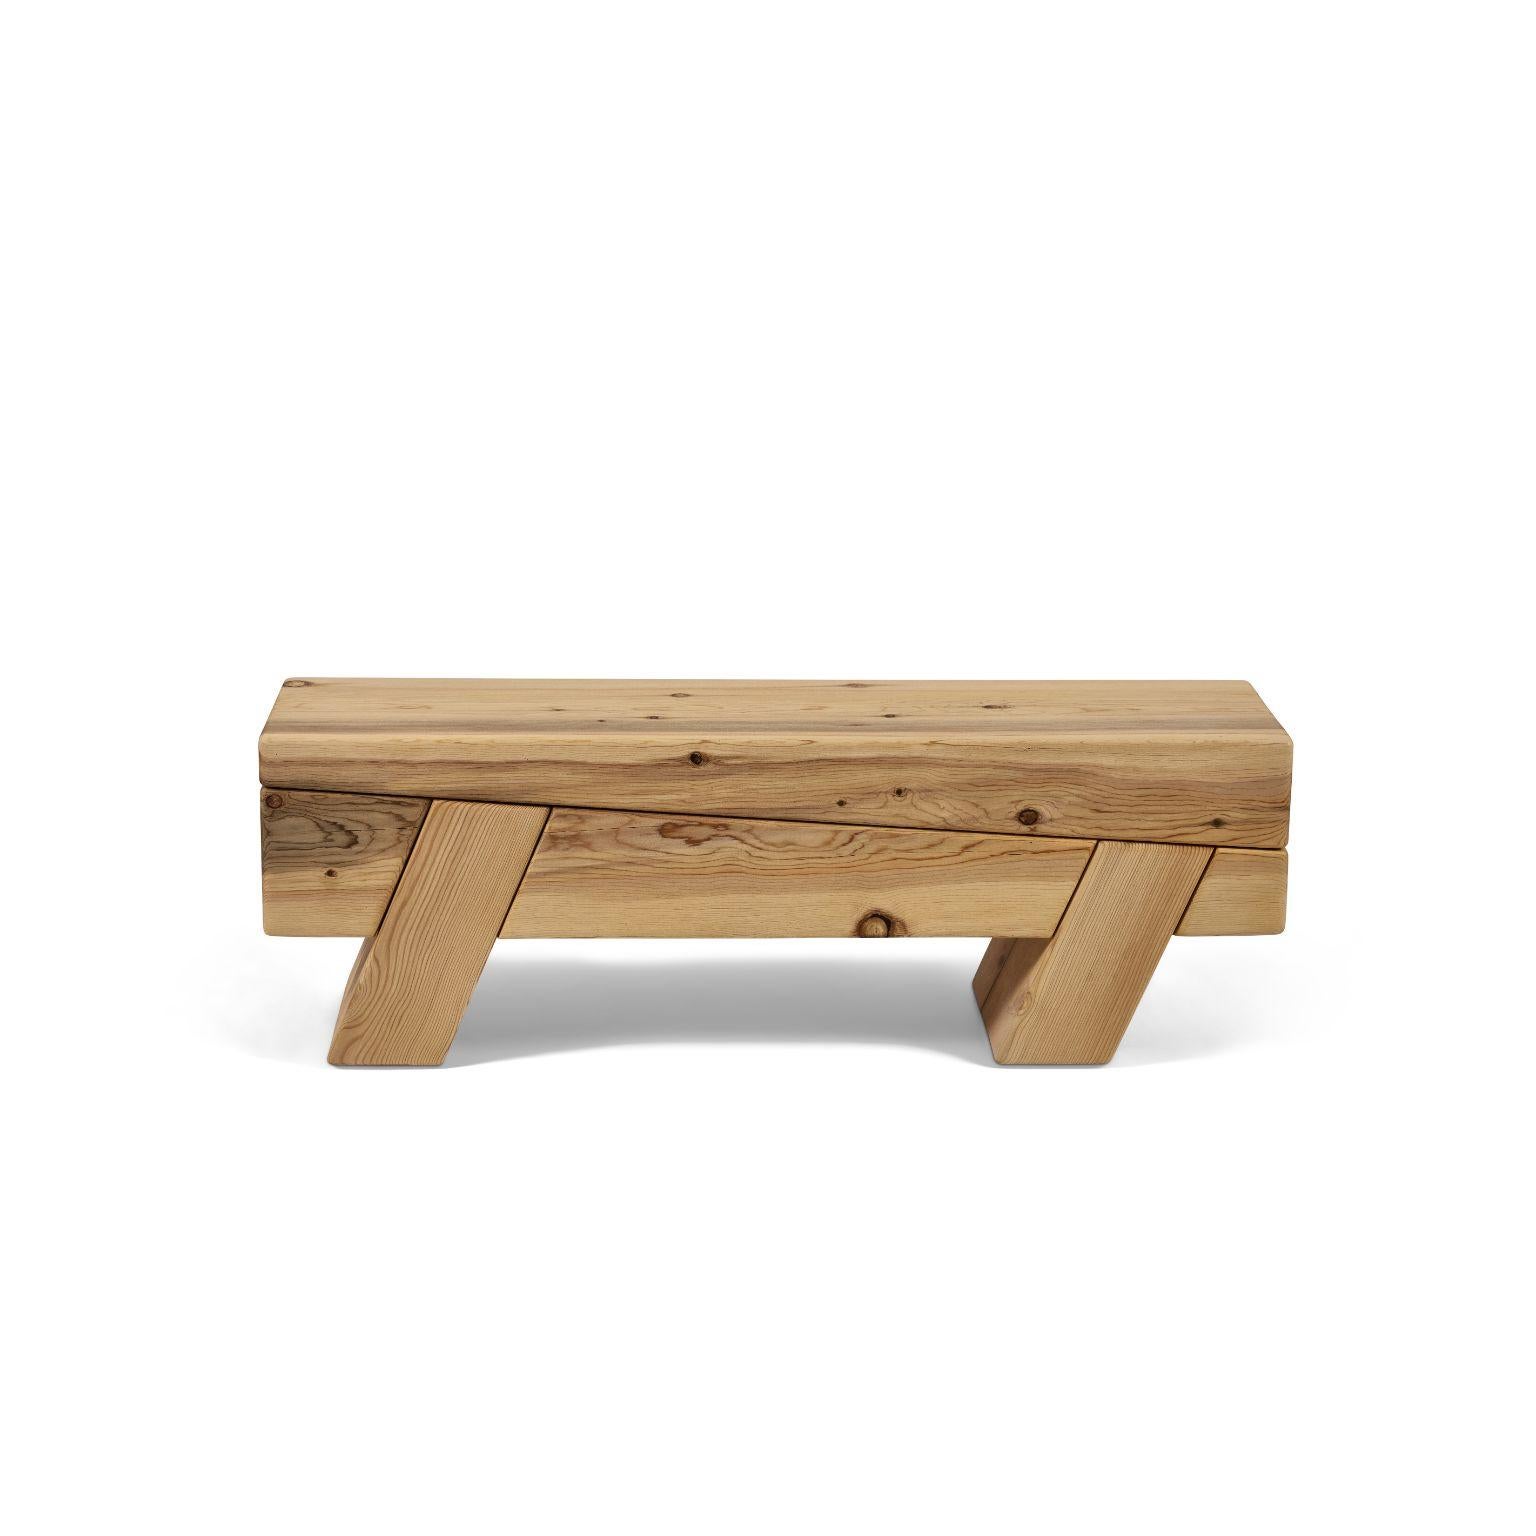 Turkish Aromatique Cedre Monoblock Bench by Contemporary Ecowood For Sale